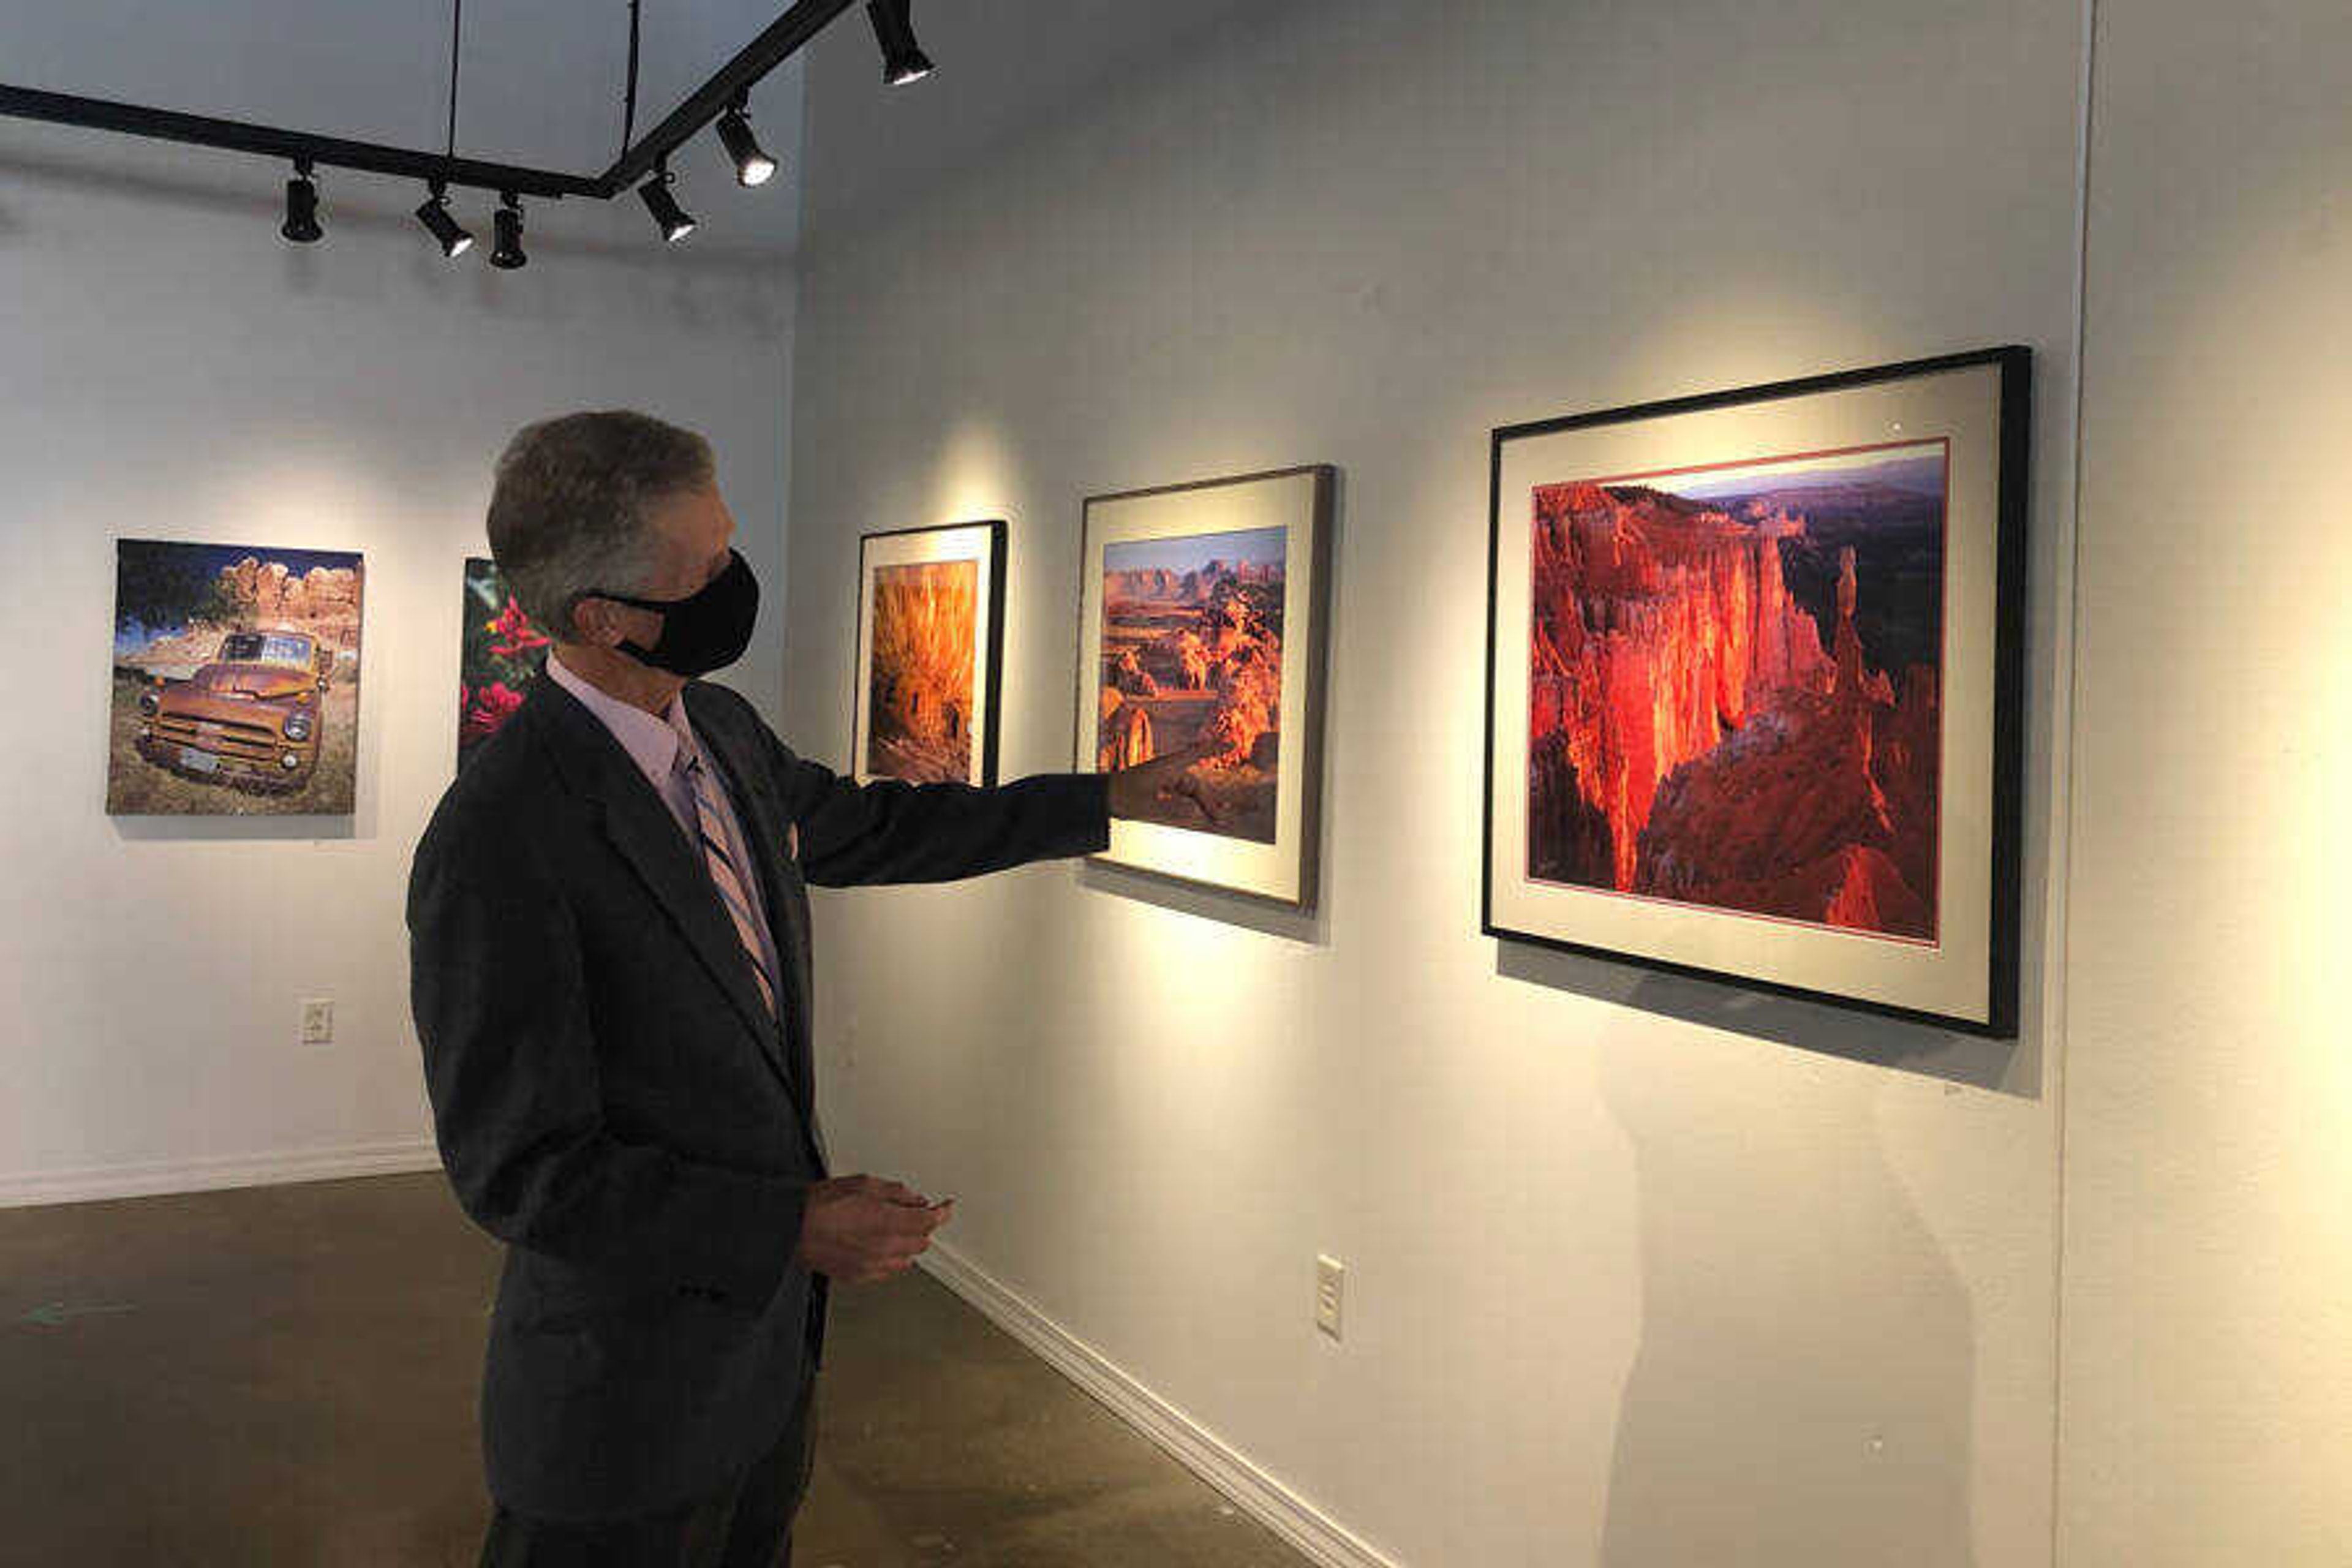 Brian Alworth, outdoor photographer and first alert meteorologist for KFVS, describes his outdoor photographs at his exhibition titled “30 Years of Photography.” The display will be up until Oct. 30 at the Southeast Missouri Council of Arts.